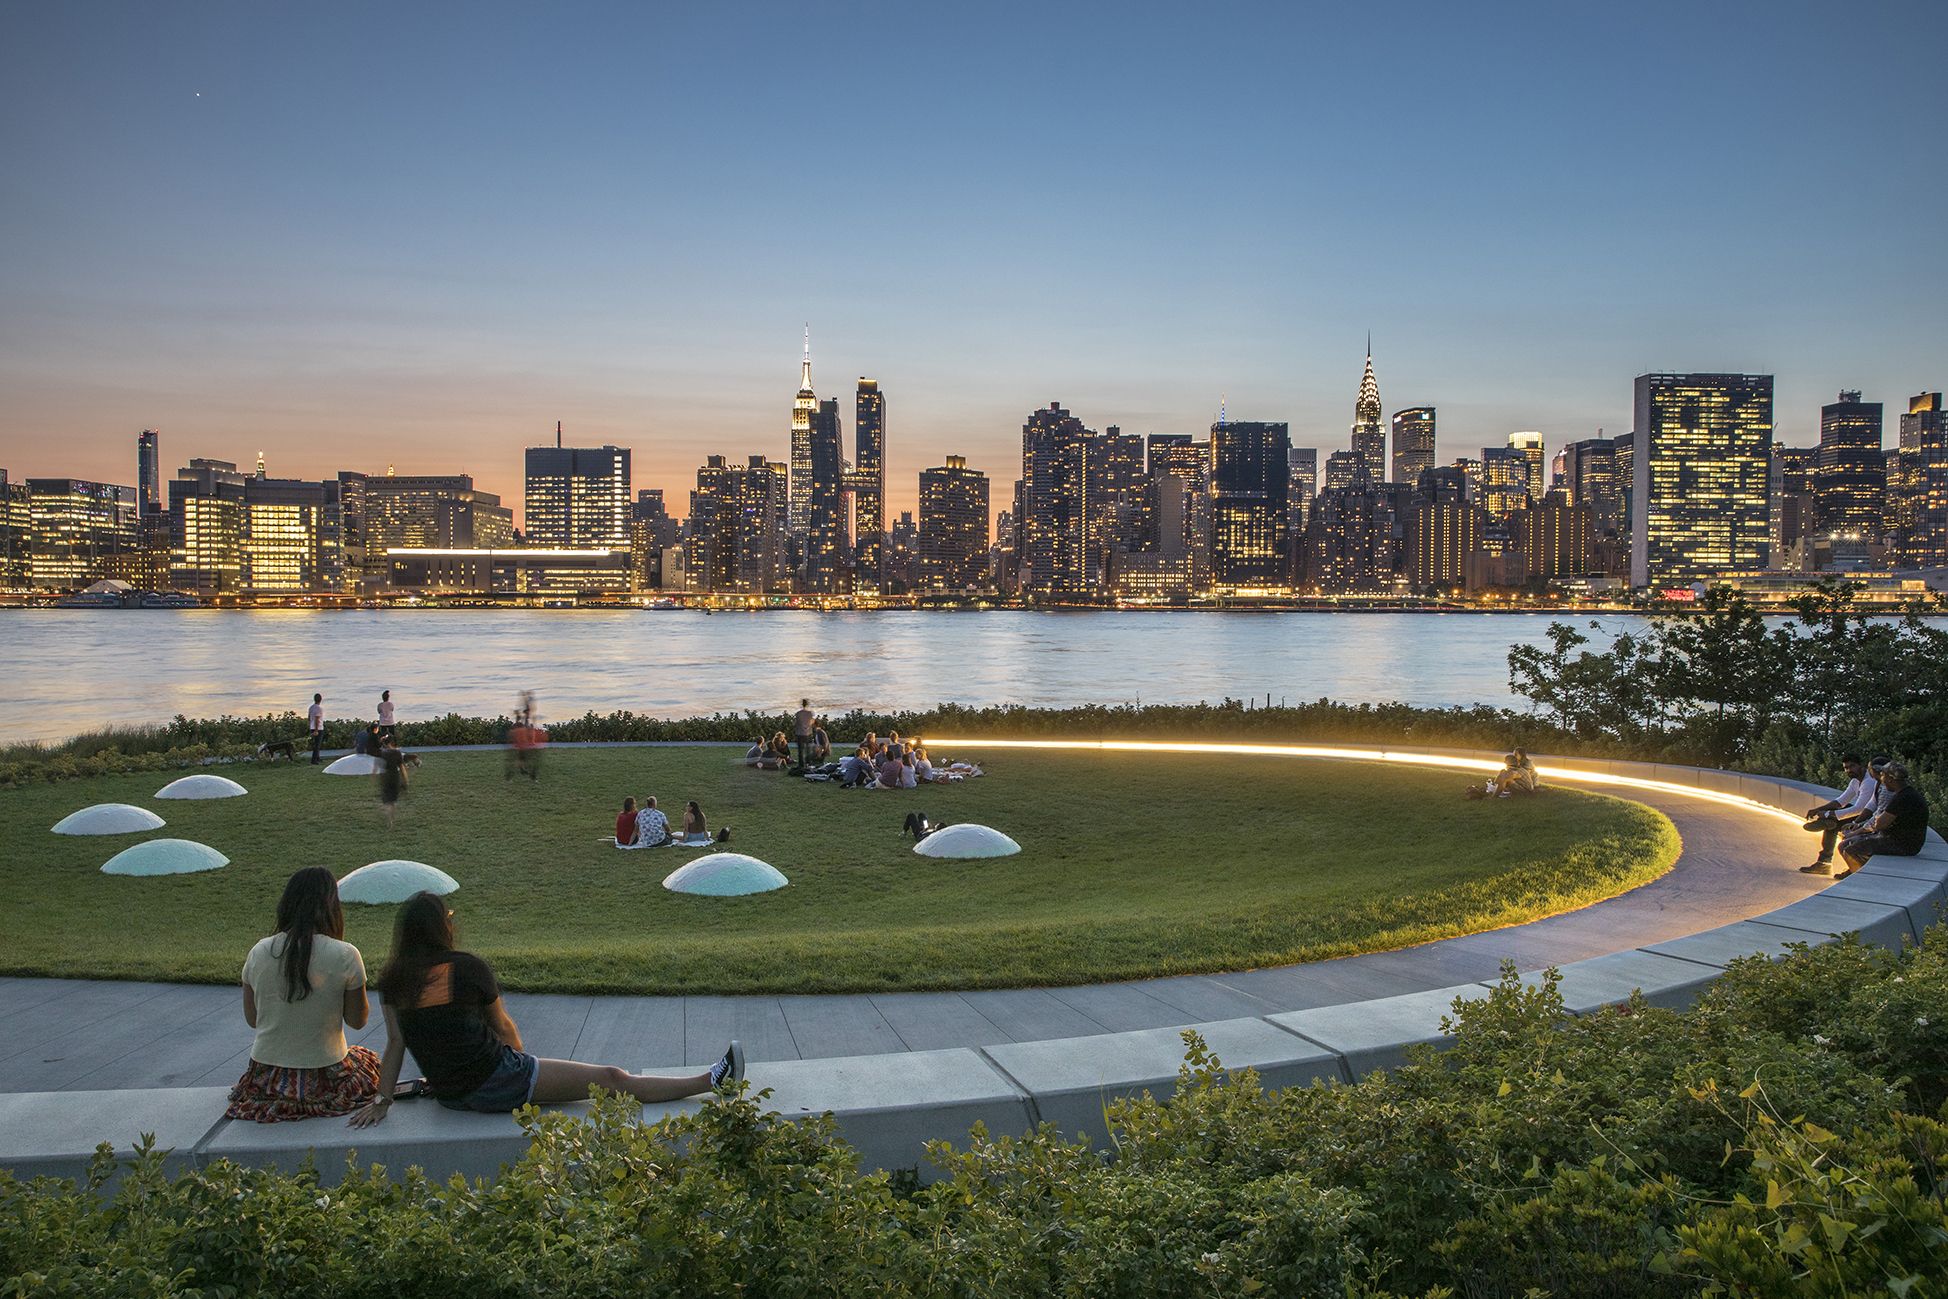 A circular green area in use as part of the Hunter's Point South Waterfront Park.